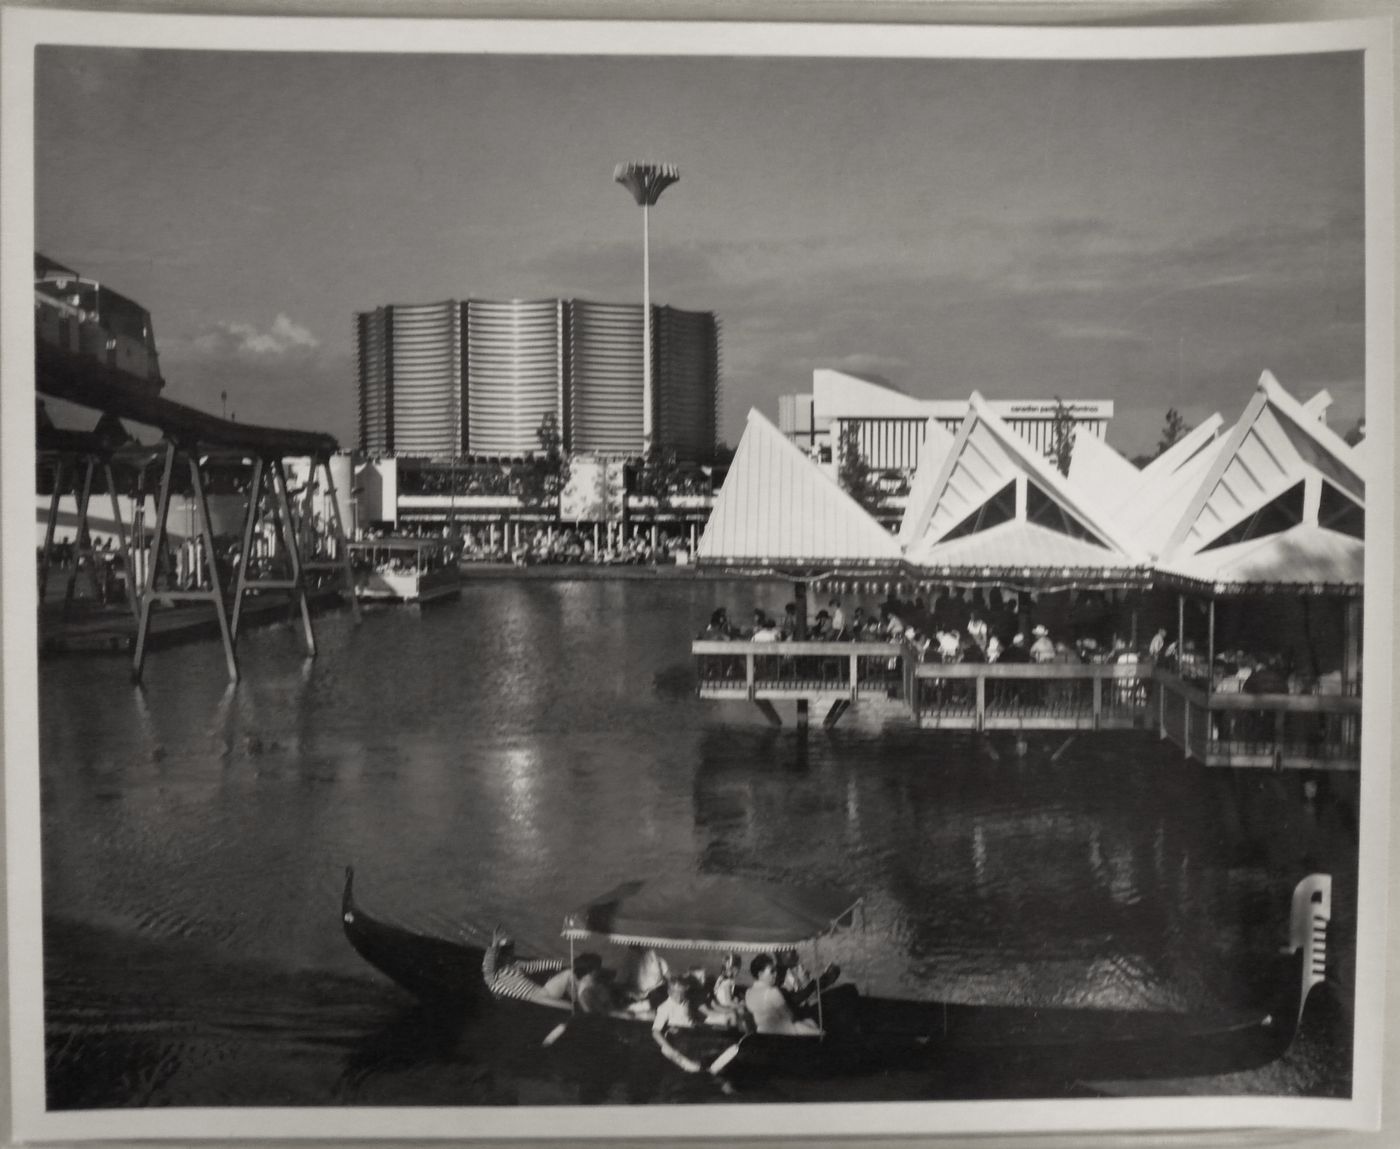 View on a waterway with a gondola in foreground and the Canadian Pacific-Cominco Pavilion in background, Expo 67, Montréal, Québec